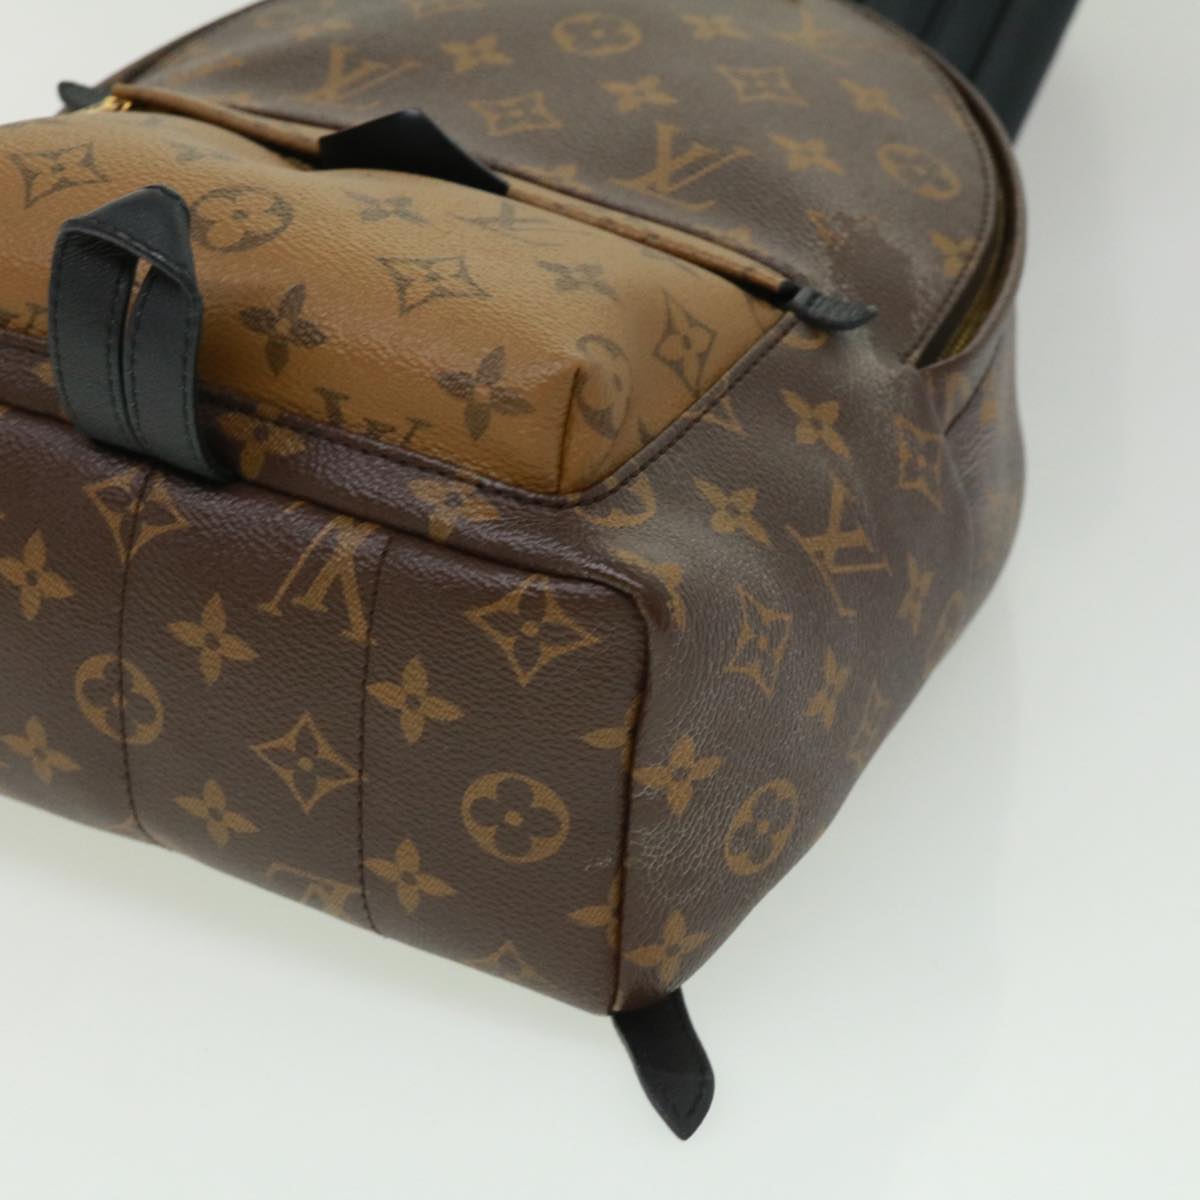 LOUIS VUITTON Monogram Reverse Palm Springs PM Backpack M44870 LV Auth bs2818